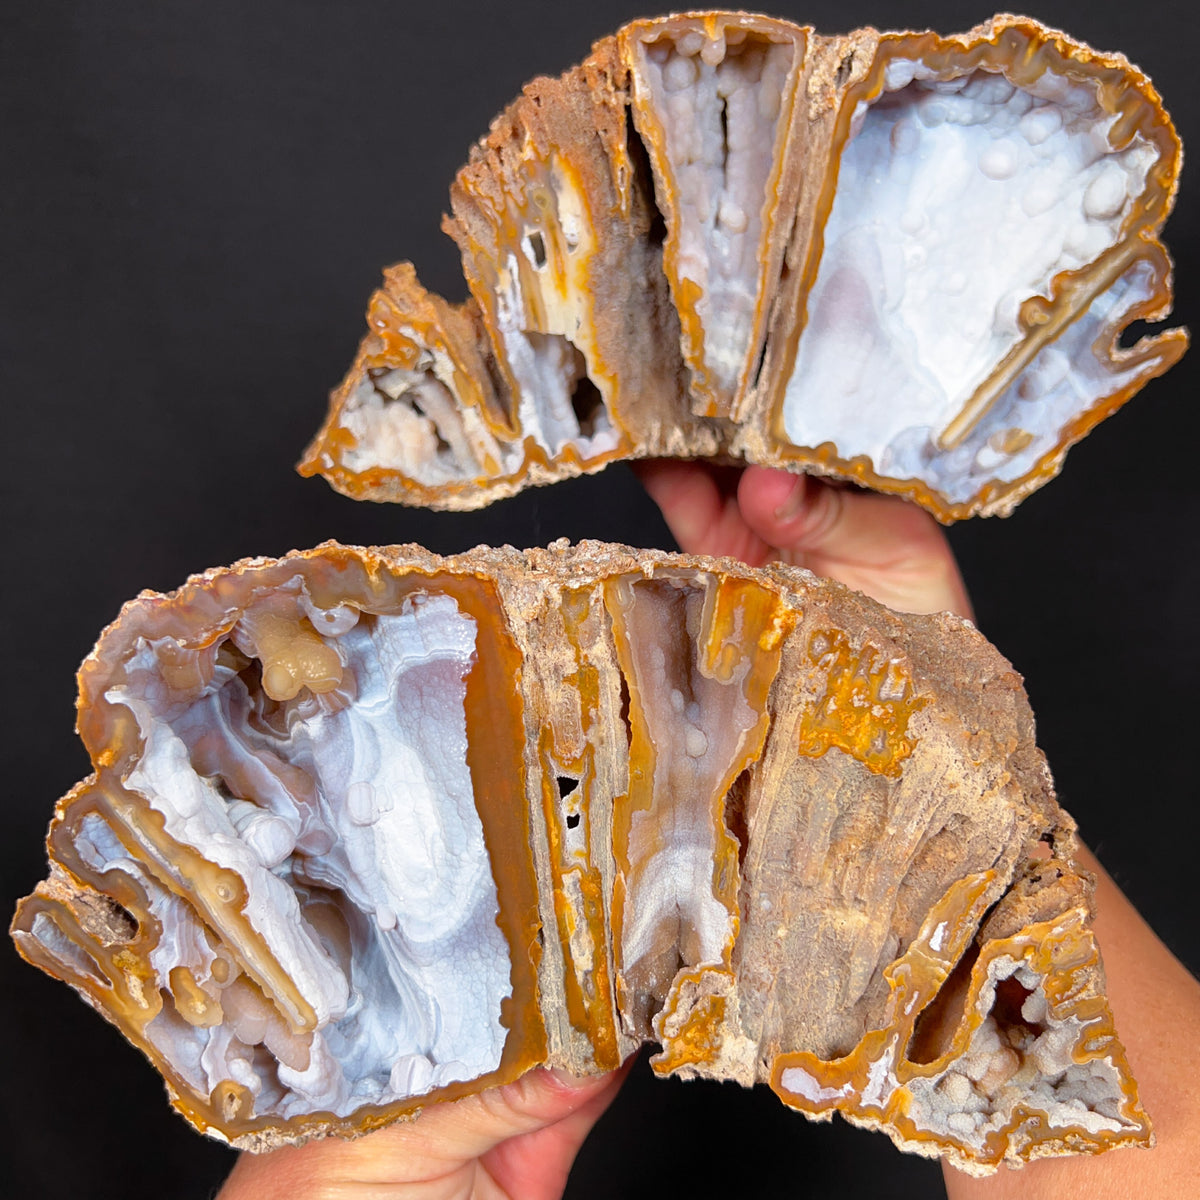 Fossilized Coral with Chalcedony crystals inside